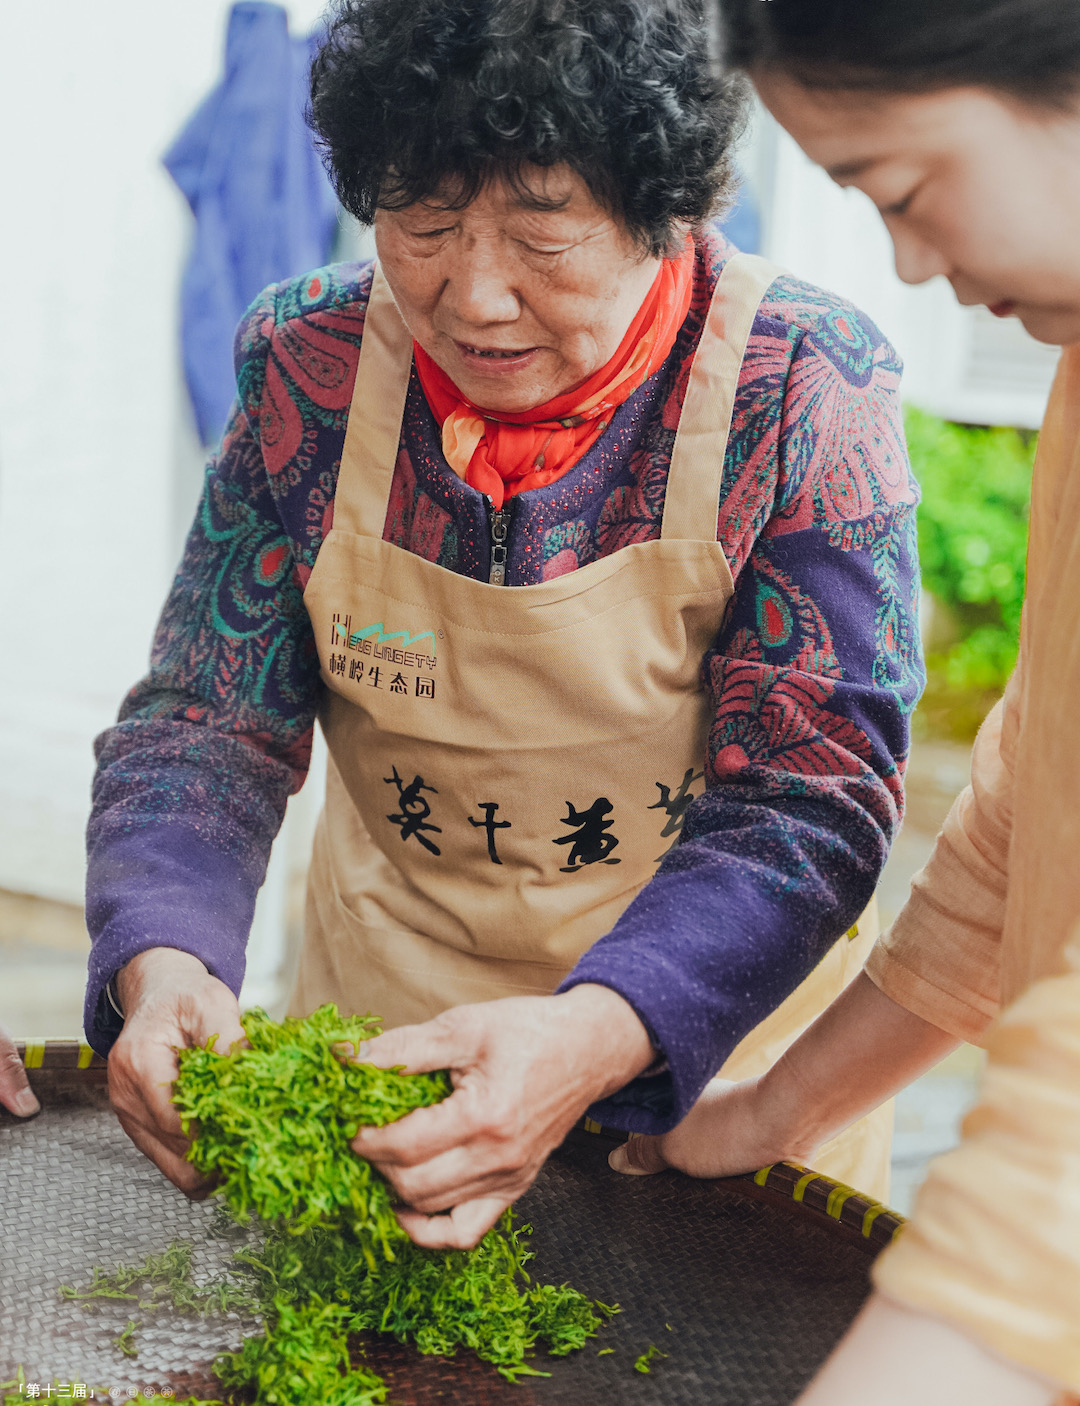 An older woman in an apron kneading tea leaves on a woven bamboo tray while a young woman holds the tray steady for her.